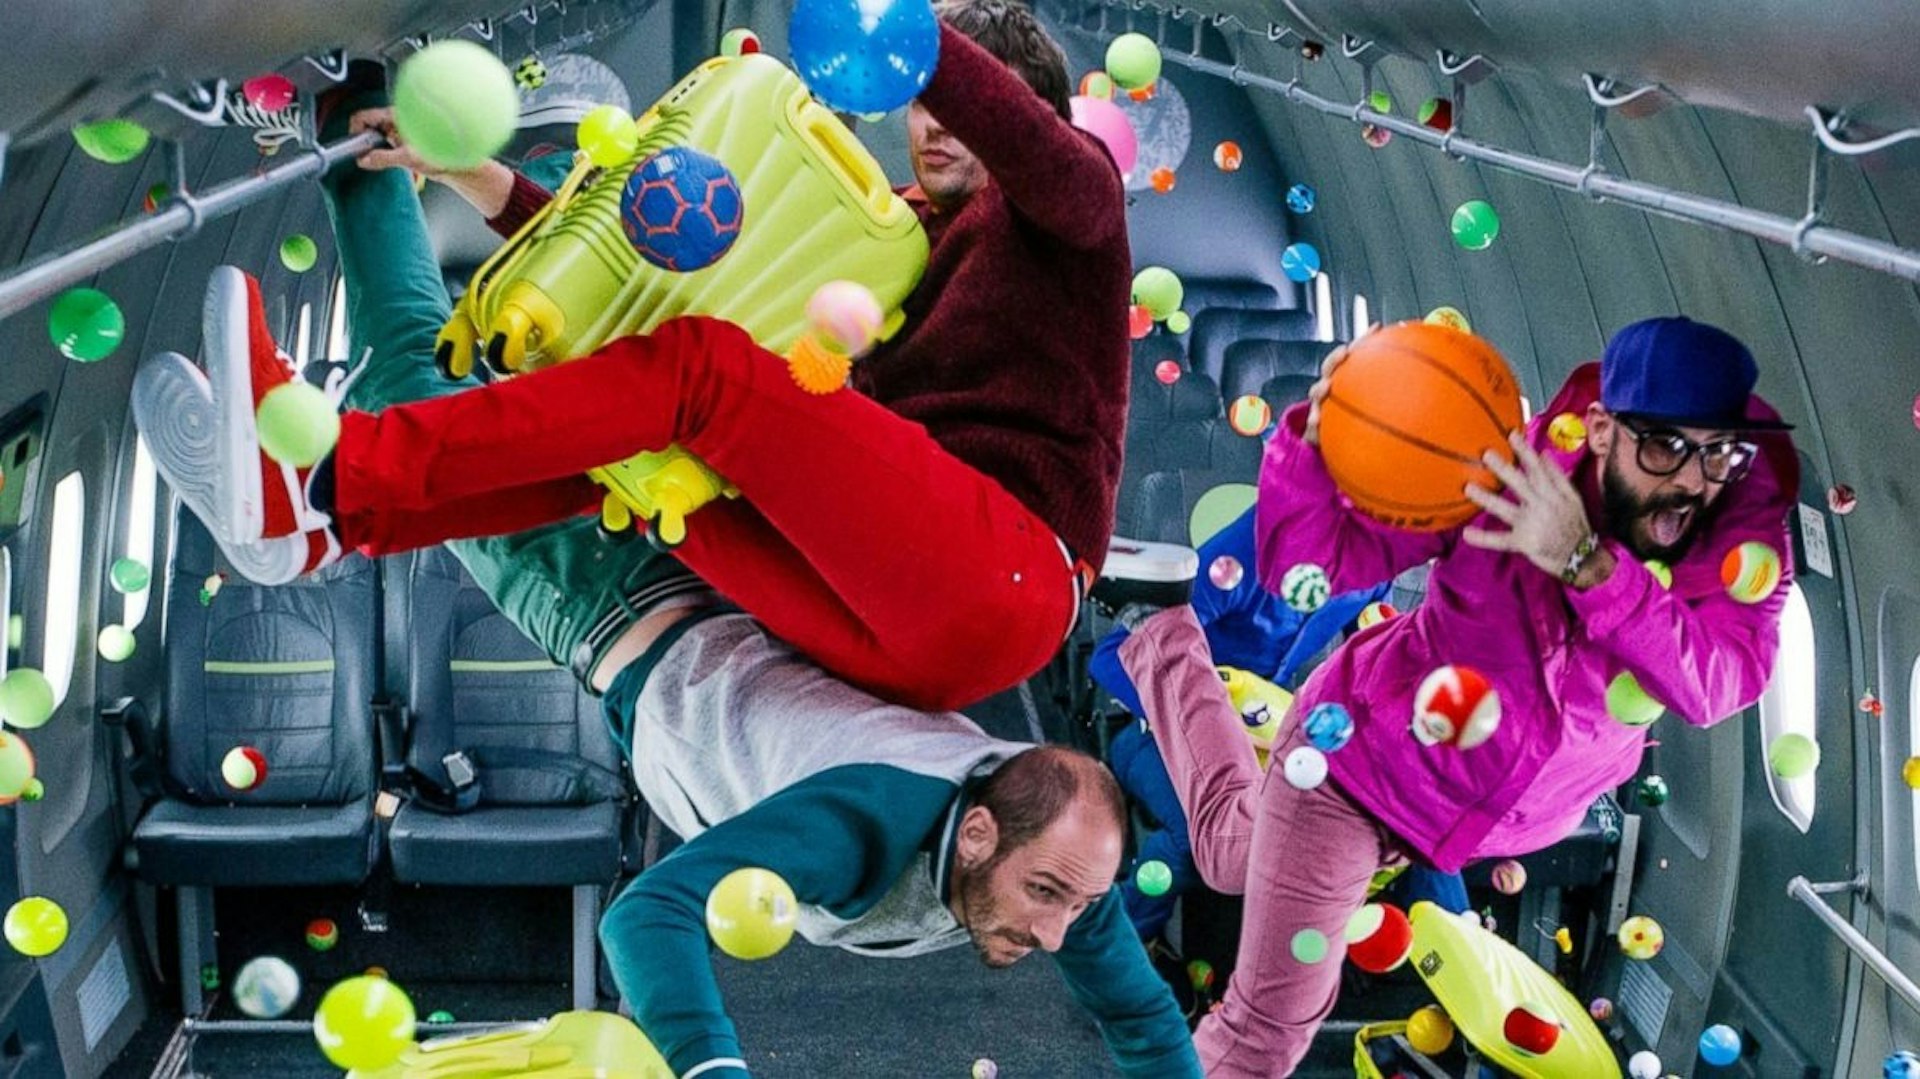 Director Interview: How OK Go danced through zero gravity for their new music video